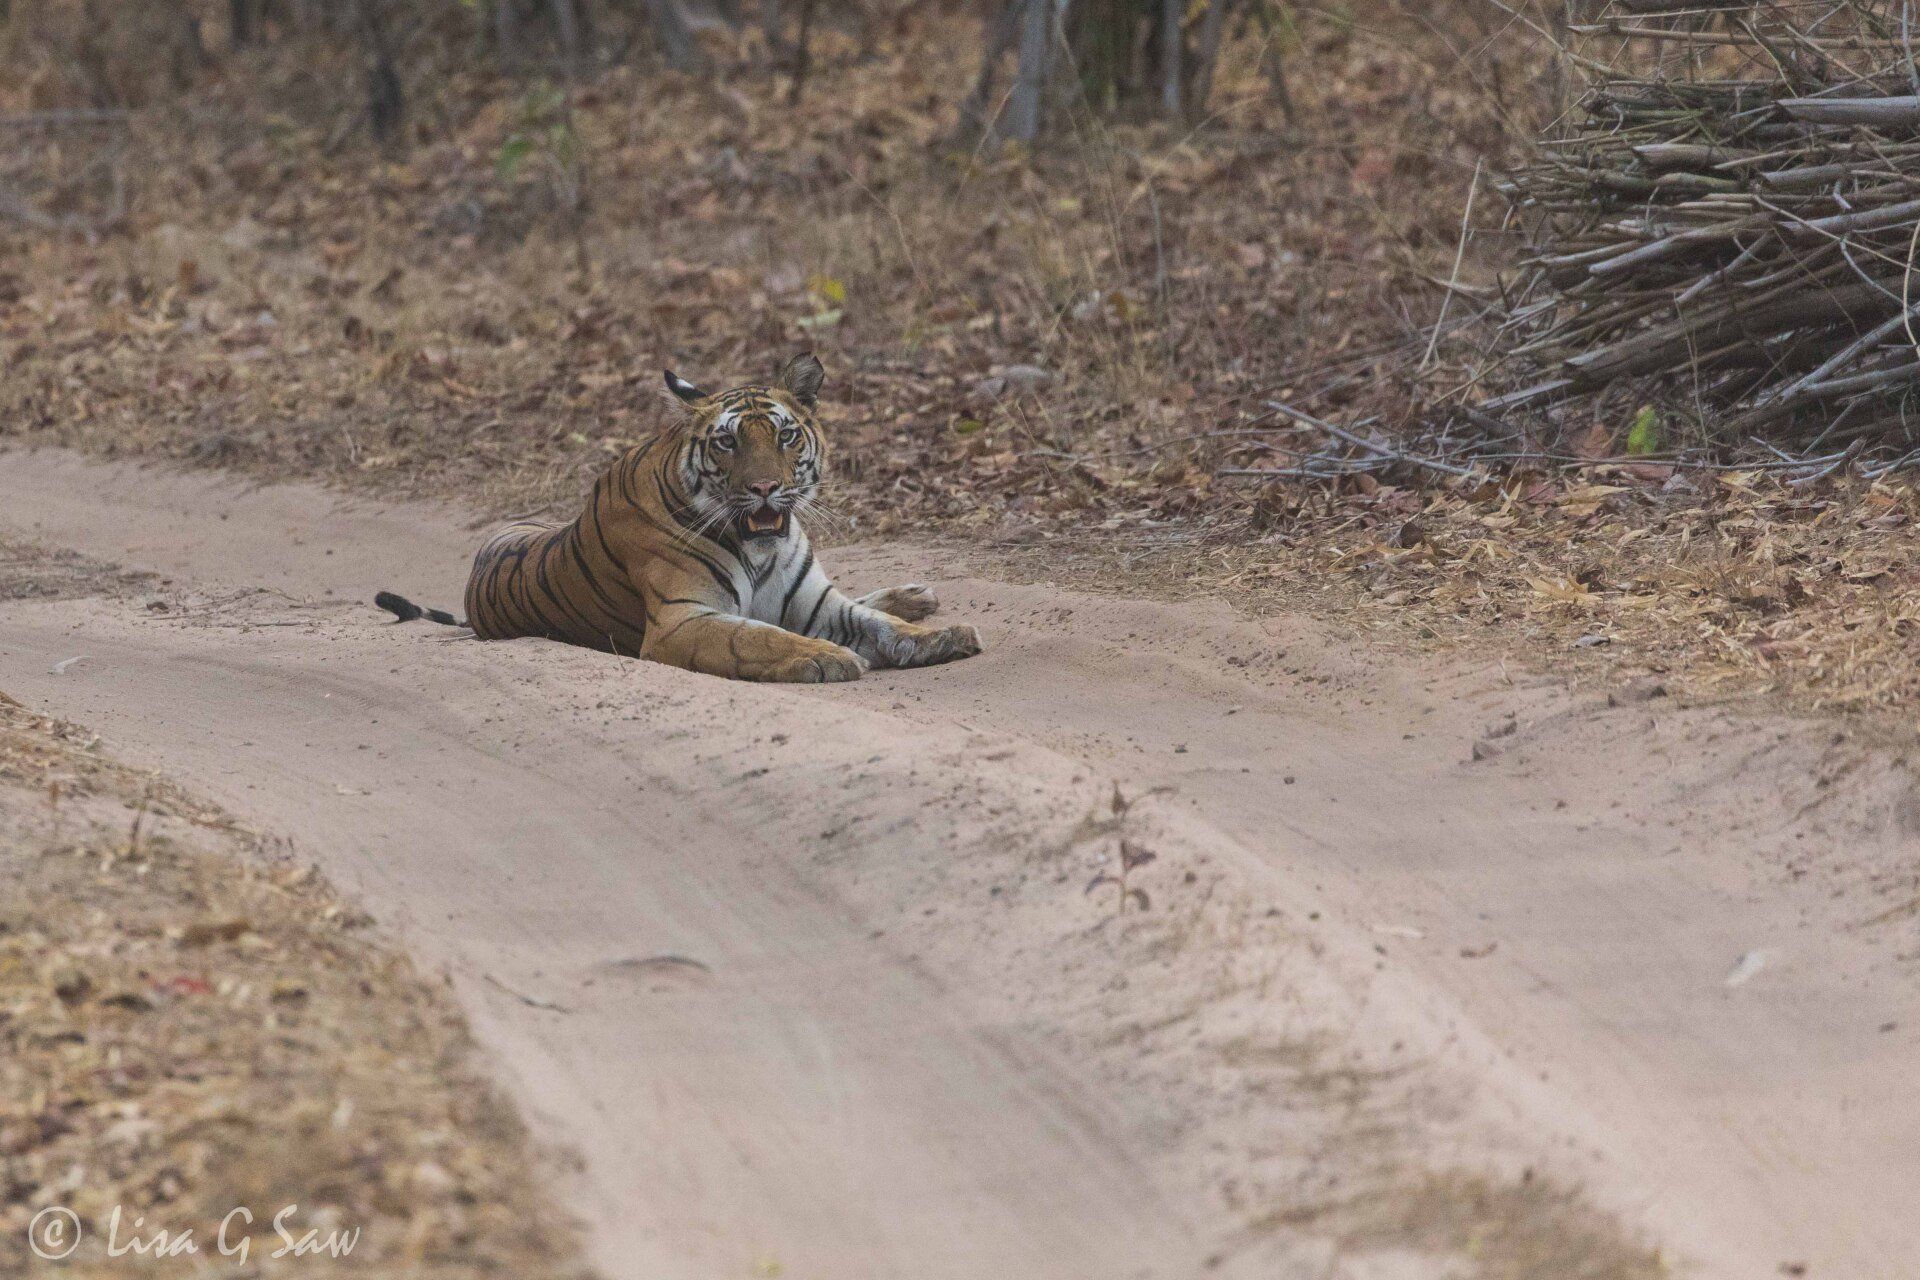 Tiger lying on the sandy track with mouth open